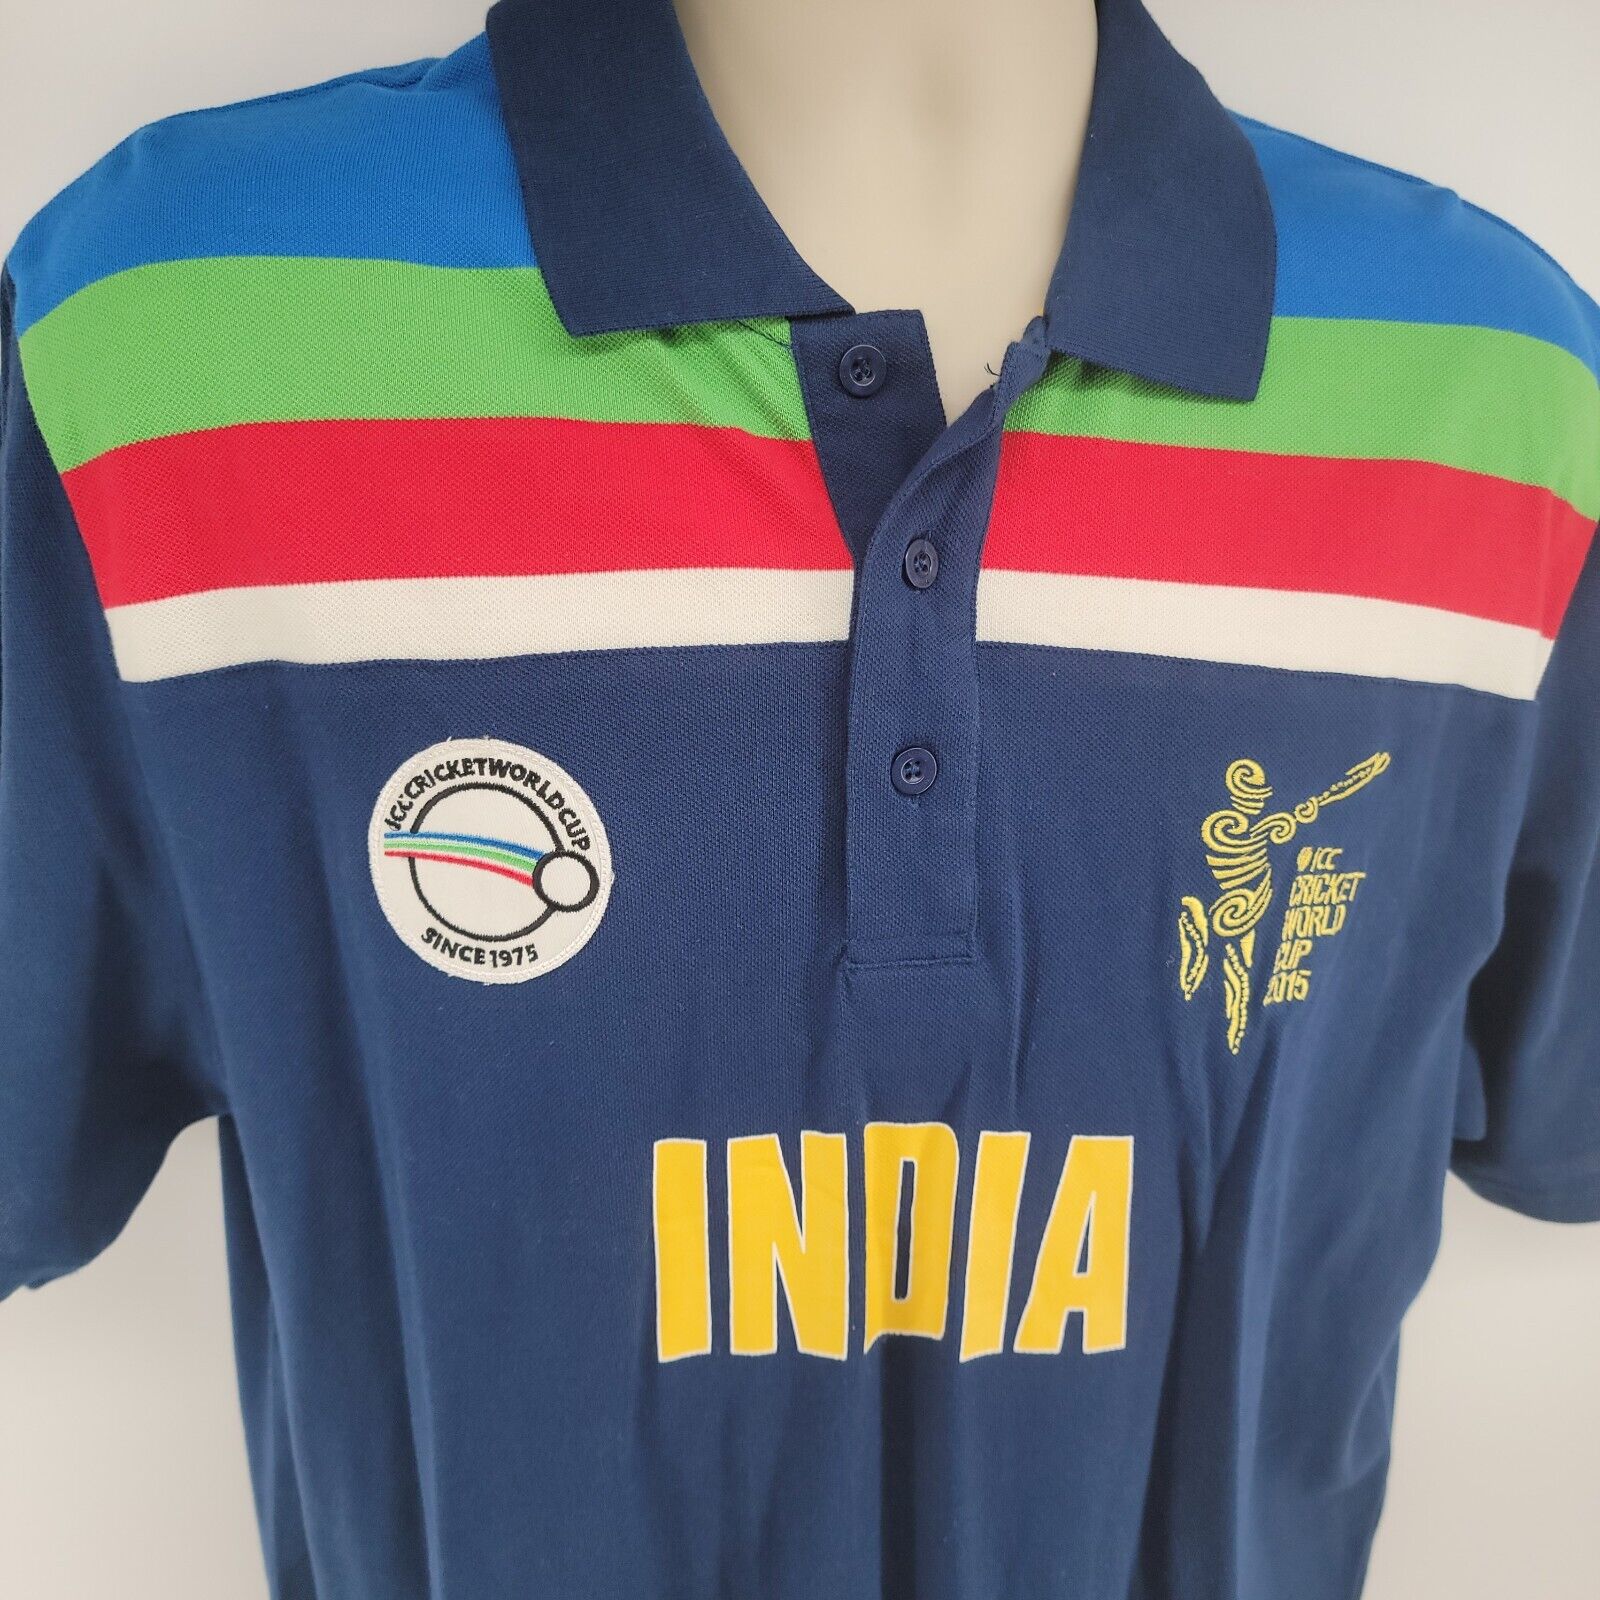 ICC Cricket World Cup 2015 India Jersey Polo Shirt Mens 2XL ICC Cricket World Cup CWC12398 - фотография #7